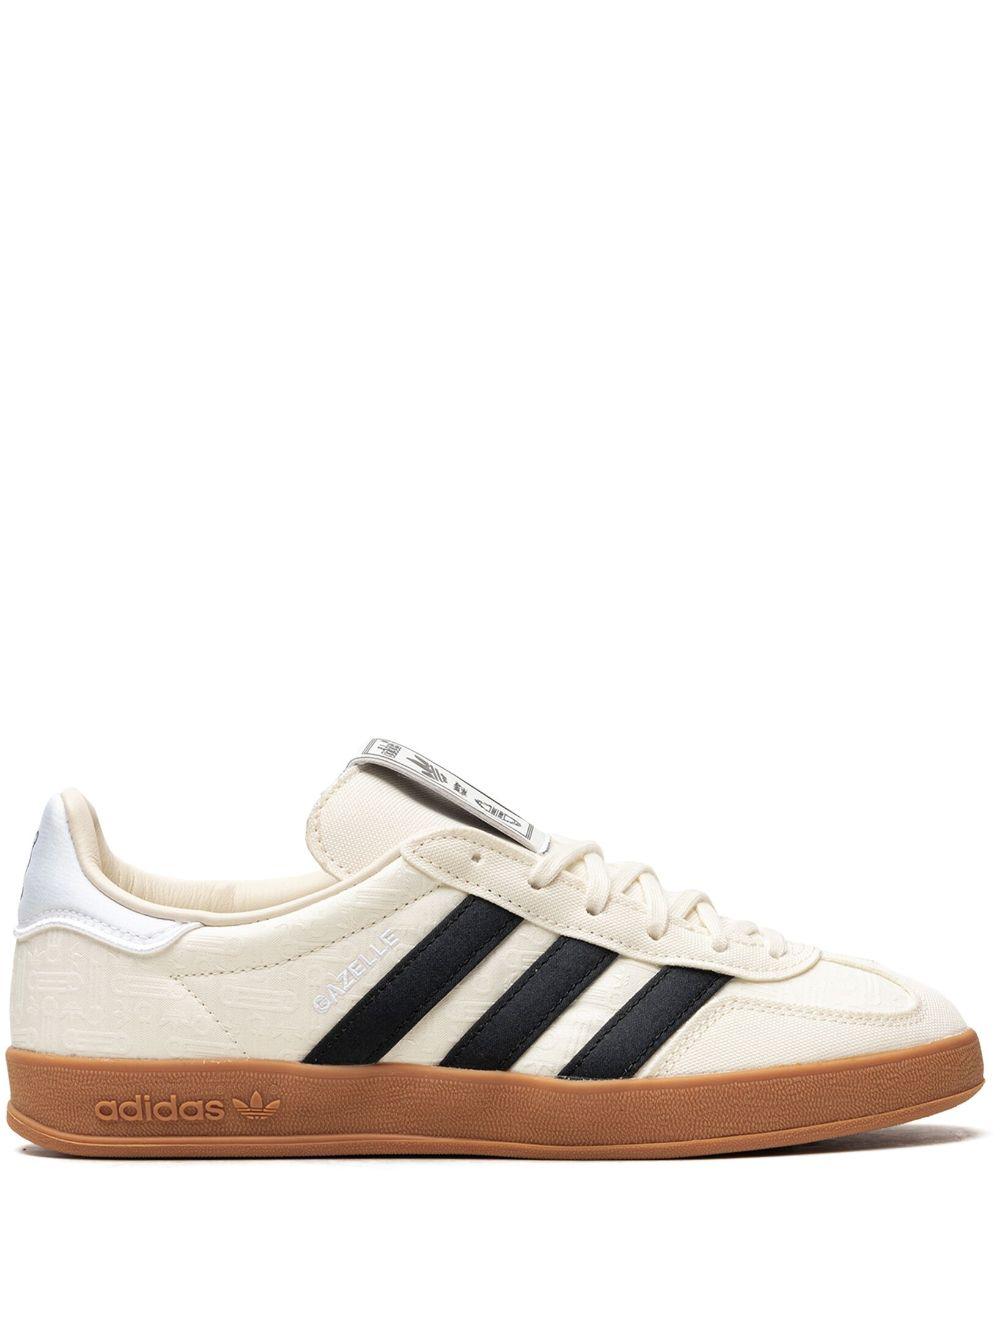 adidas X Dorophy Tang Gazelle Indoor Sneakers in White | Lyst